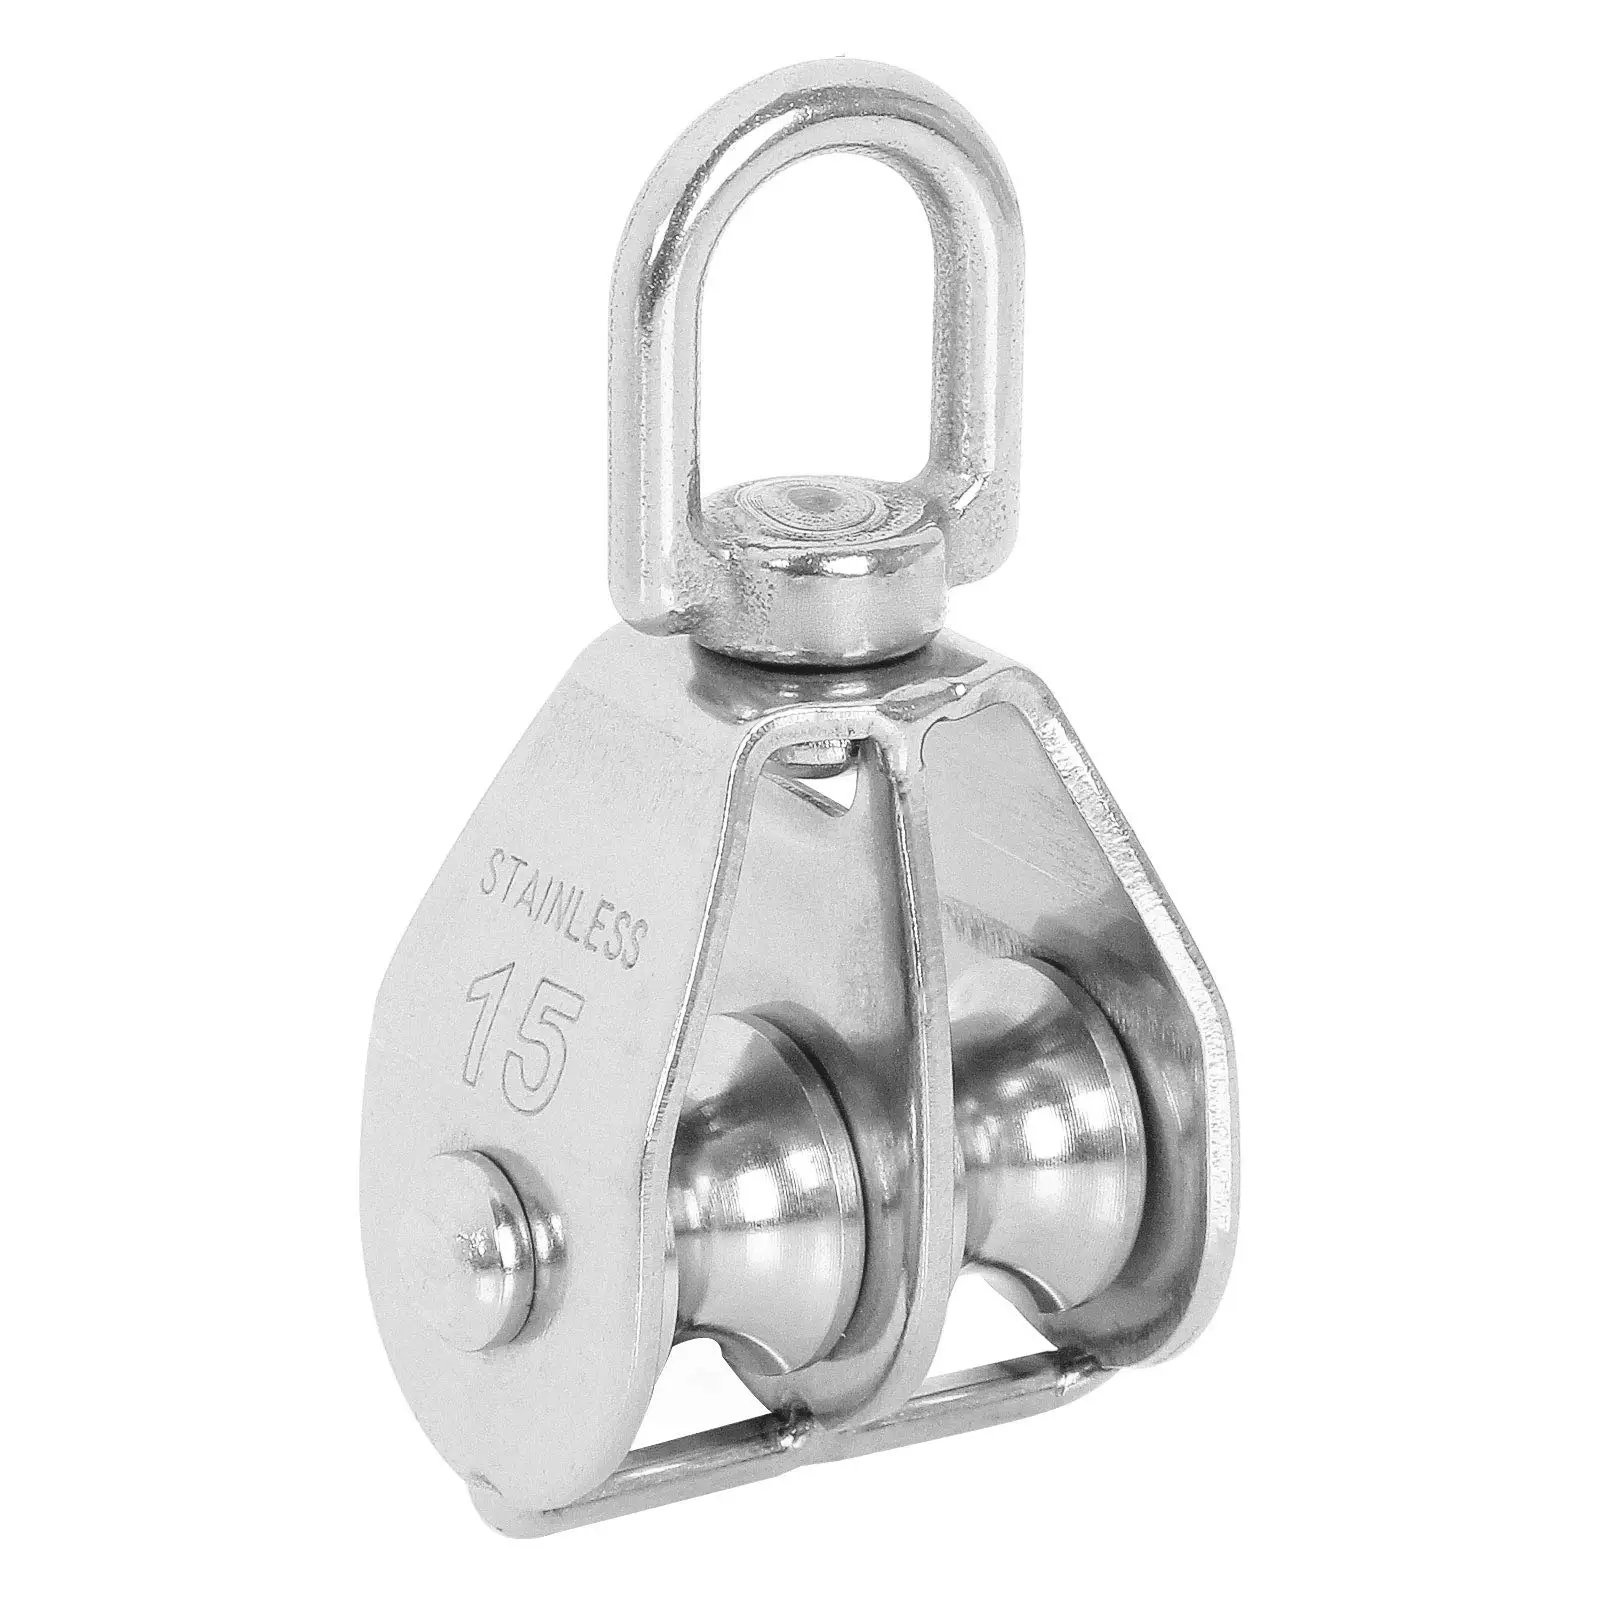 Double Pulley Block Hanging Wire Pulley Roller 304 Stainless Steel Heavy Duty Double Wheel Block Pulley for Lifting Rope (M15) m100 lifting single pulley roller loading 3300ibs 304 stainless steel heavy duty single wheel swivel lifting rope pulley block